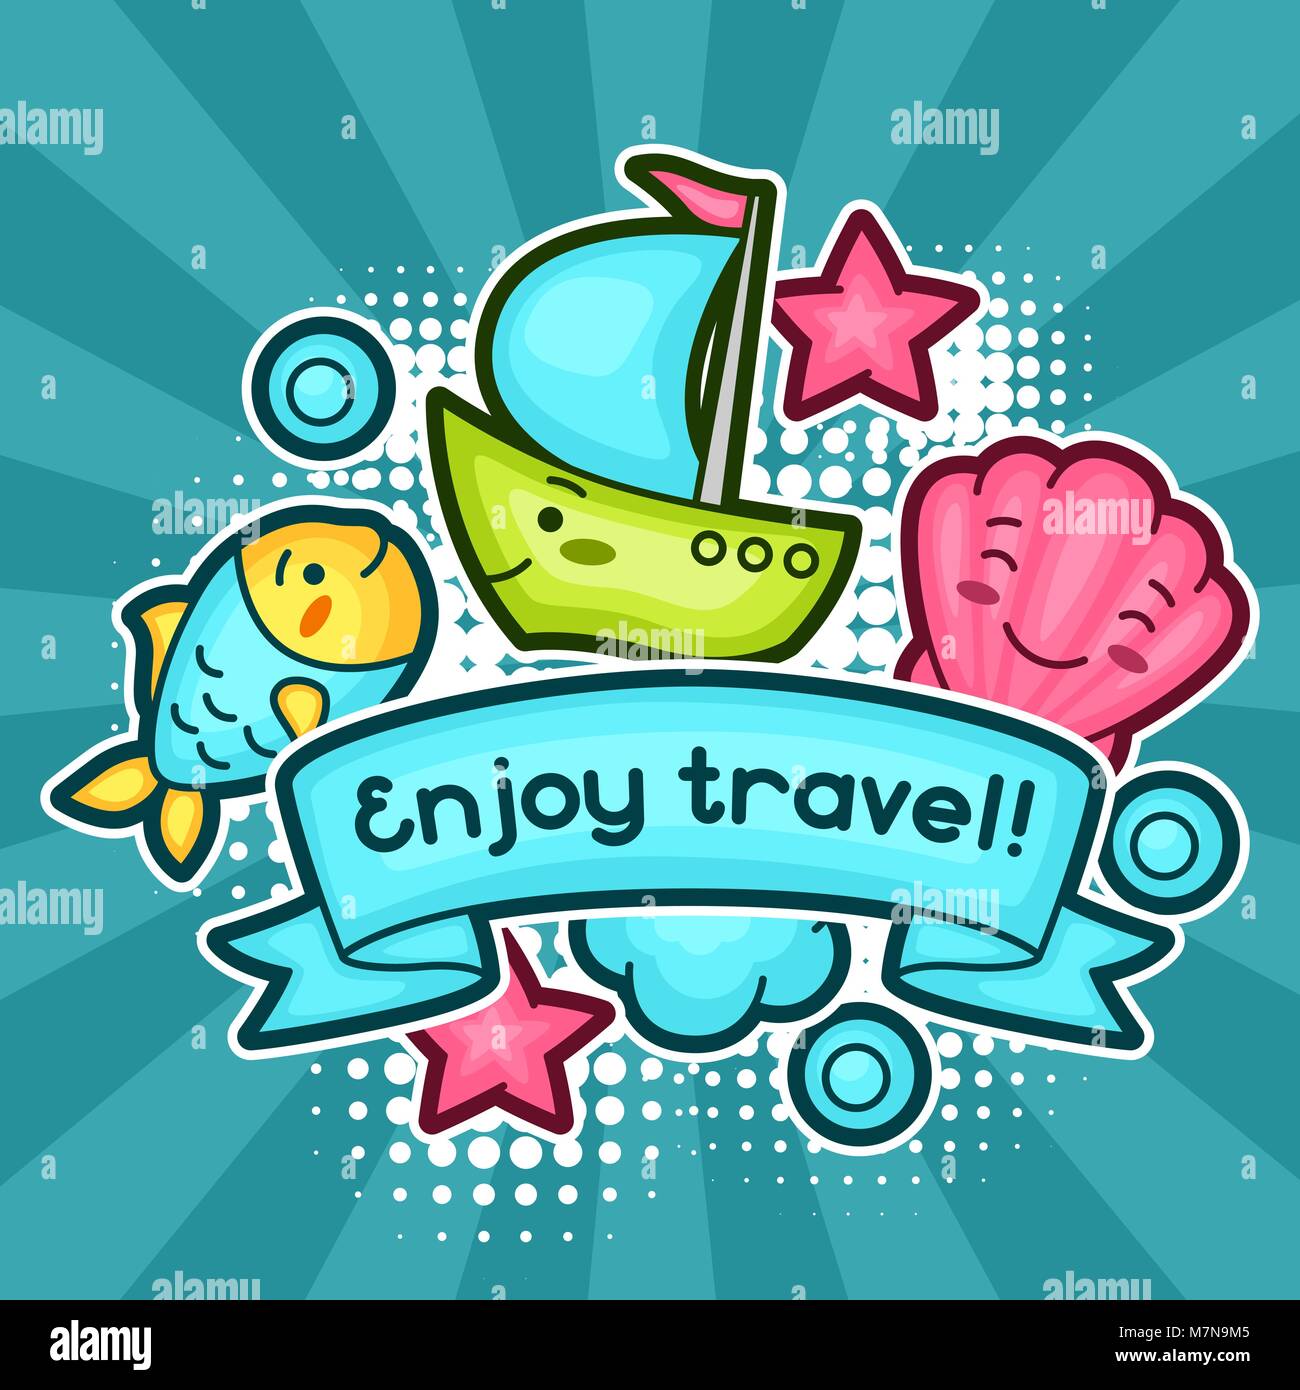 Cute travel background with kawaii doodles. Summer collection of cheerful cartoon characters fish, shell, ship, cloud and decorative objects Stock Vector